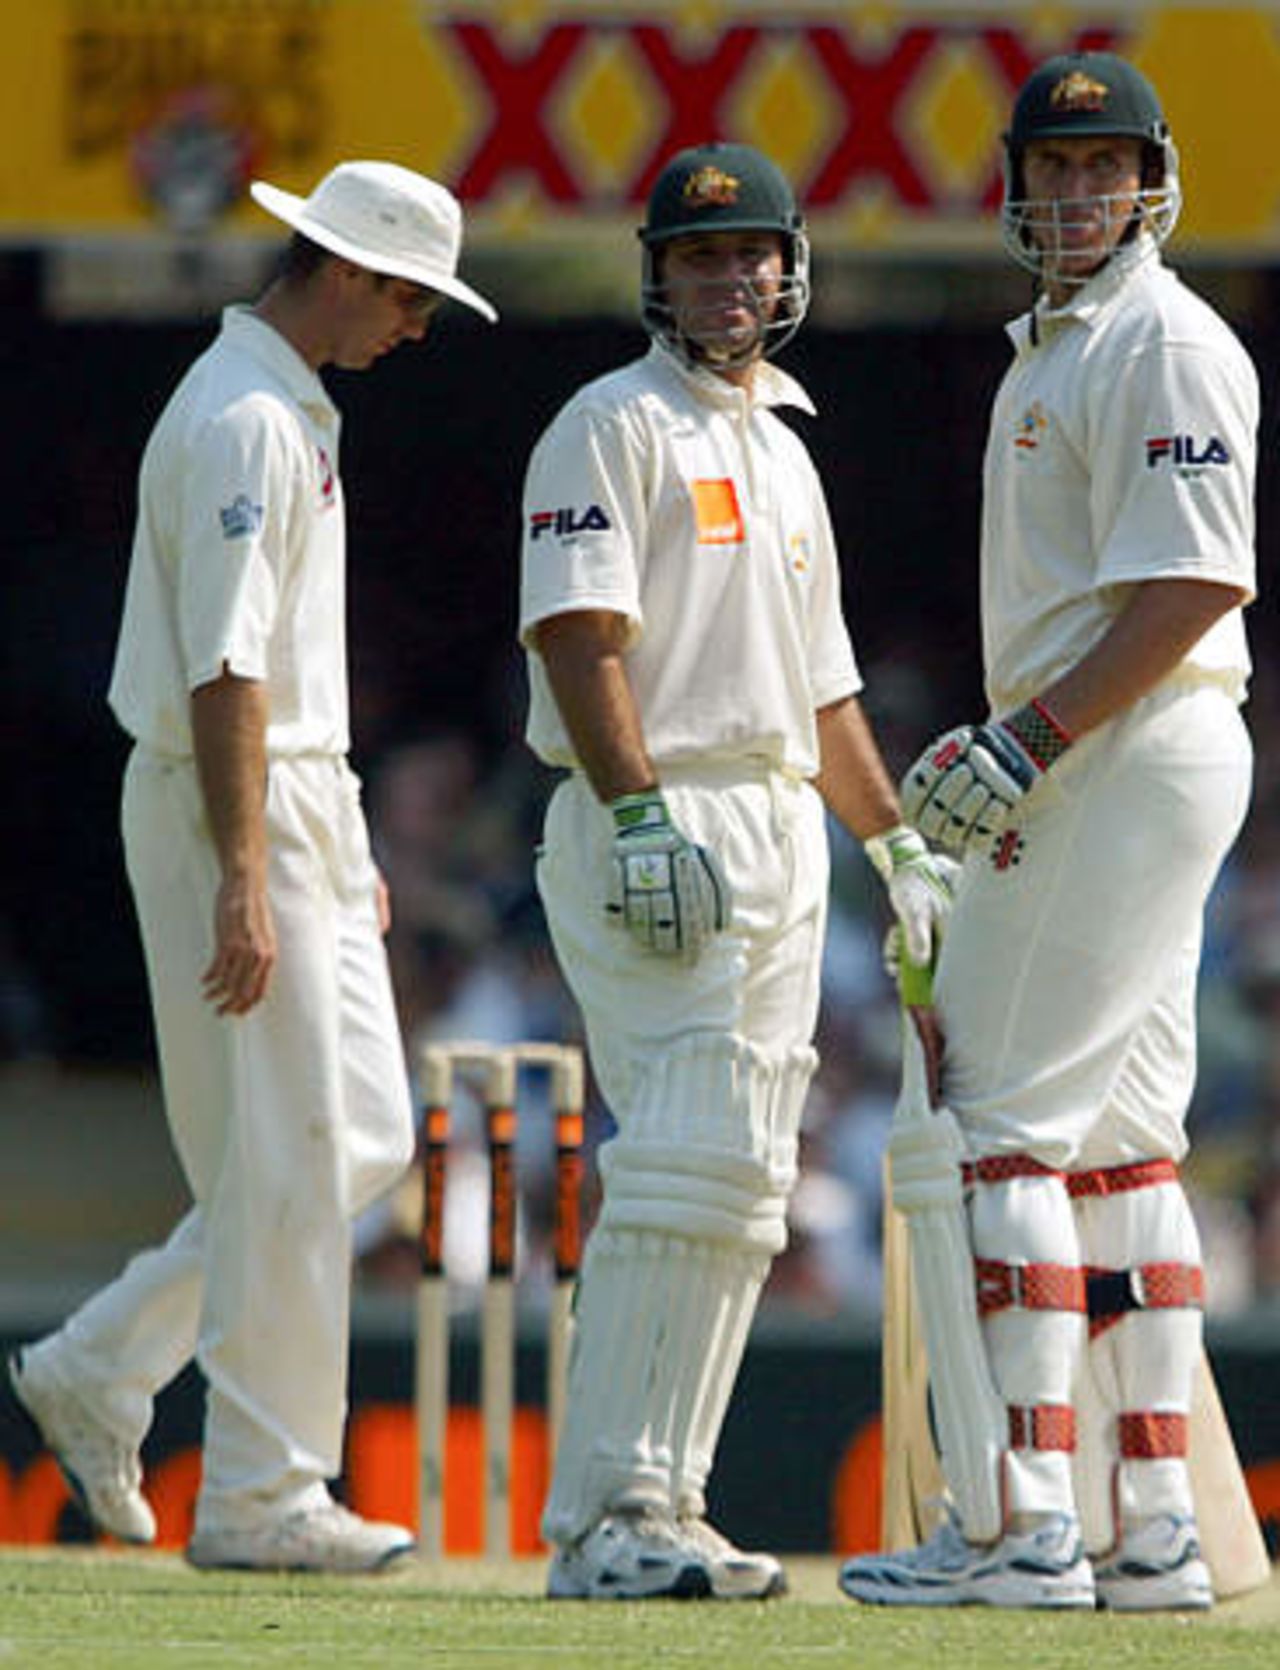 Australia's Matthew Hayden (R) and Ricky Ponting (C) talk as England's Michael Vaughan walks behind during the first day's play in the first Ashes test match at the Gabba in Brisbane November 7, 2002.